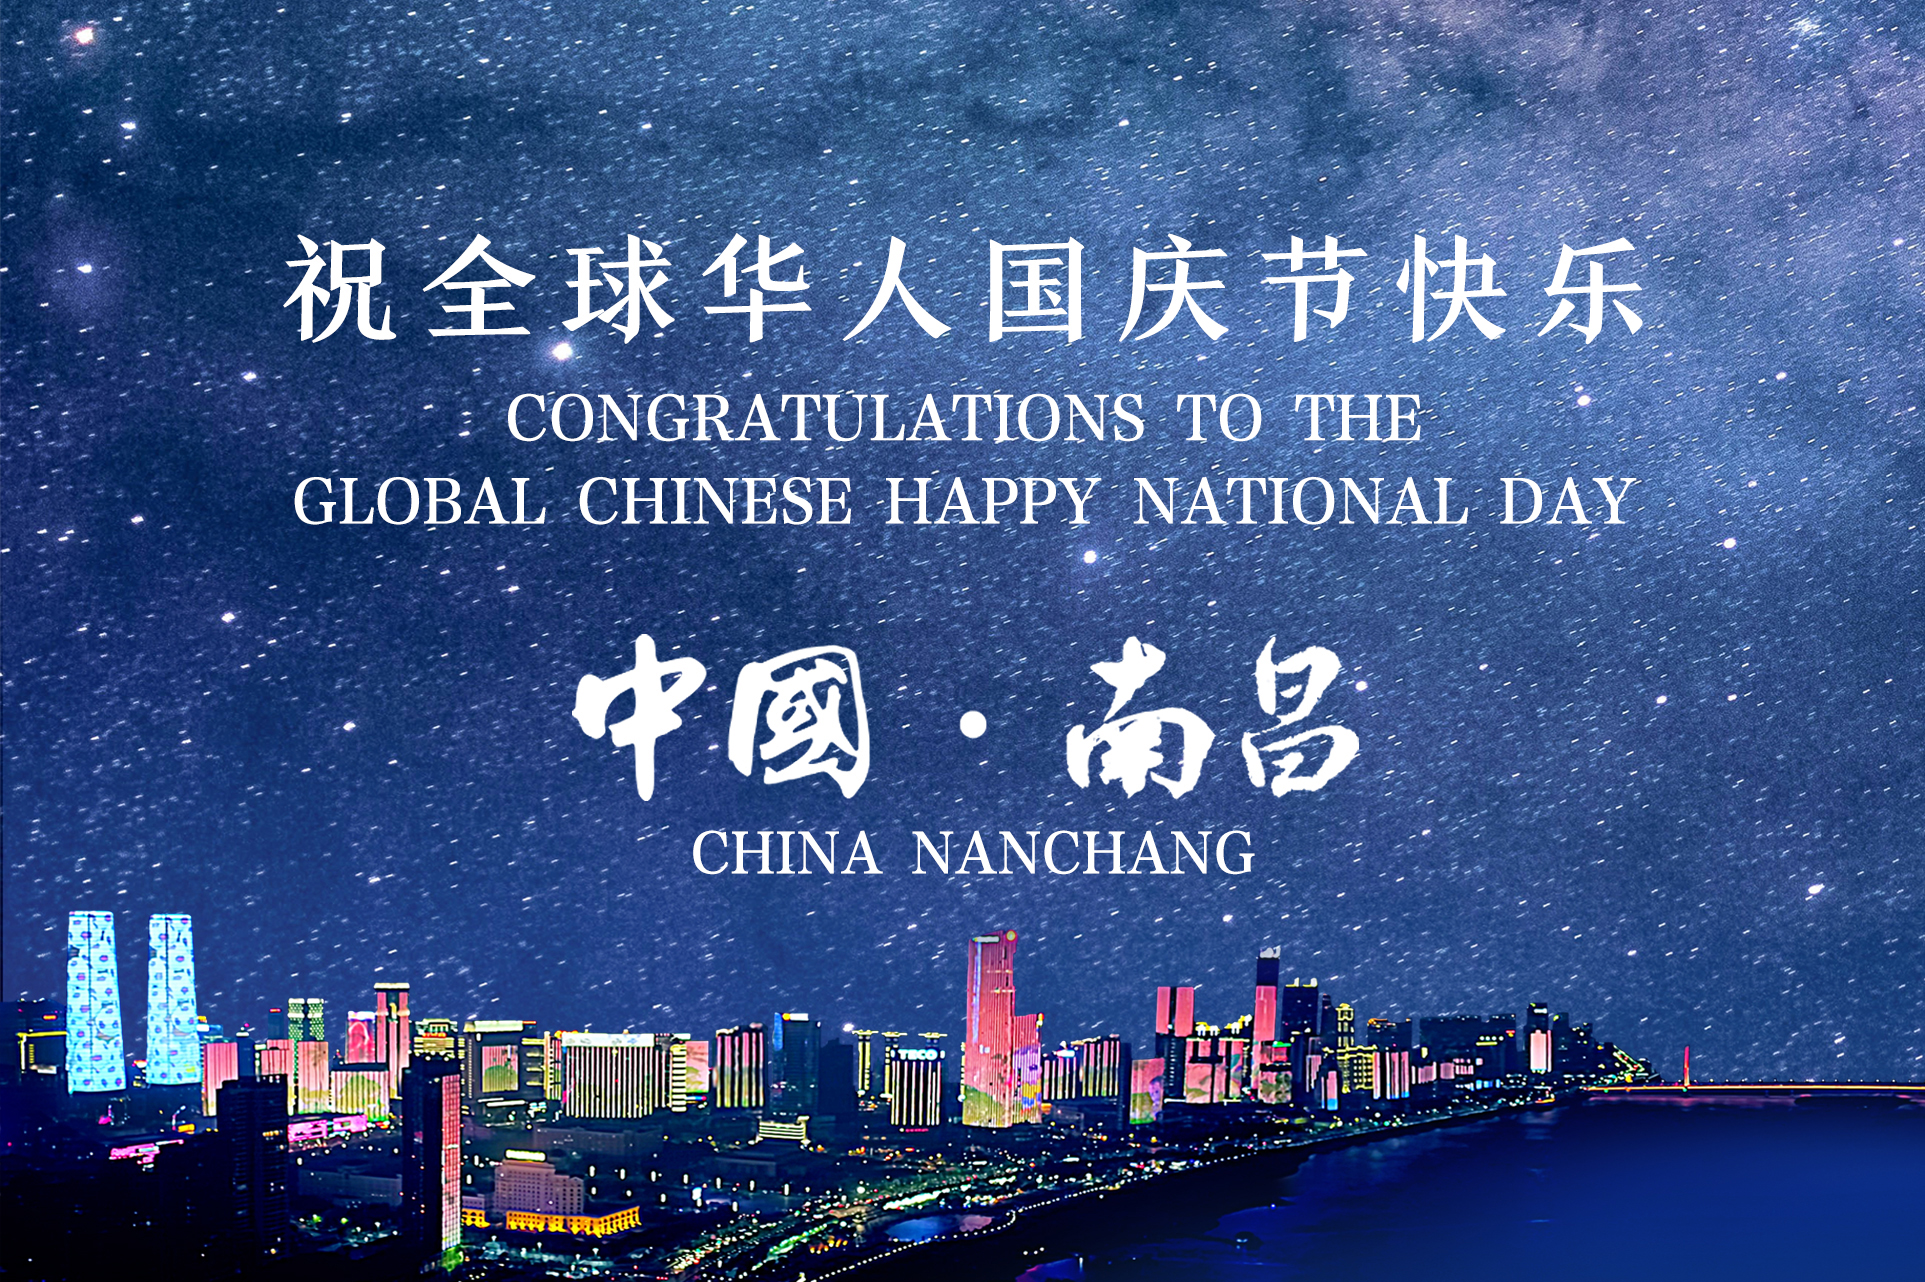 Congratulations to Global Chinese Happy National Day.